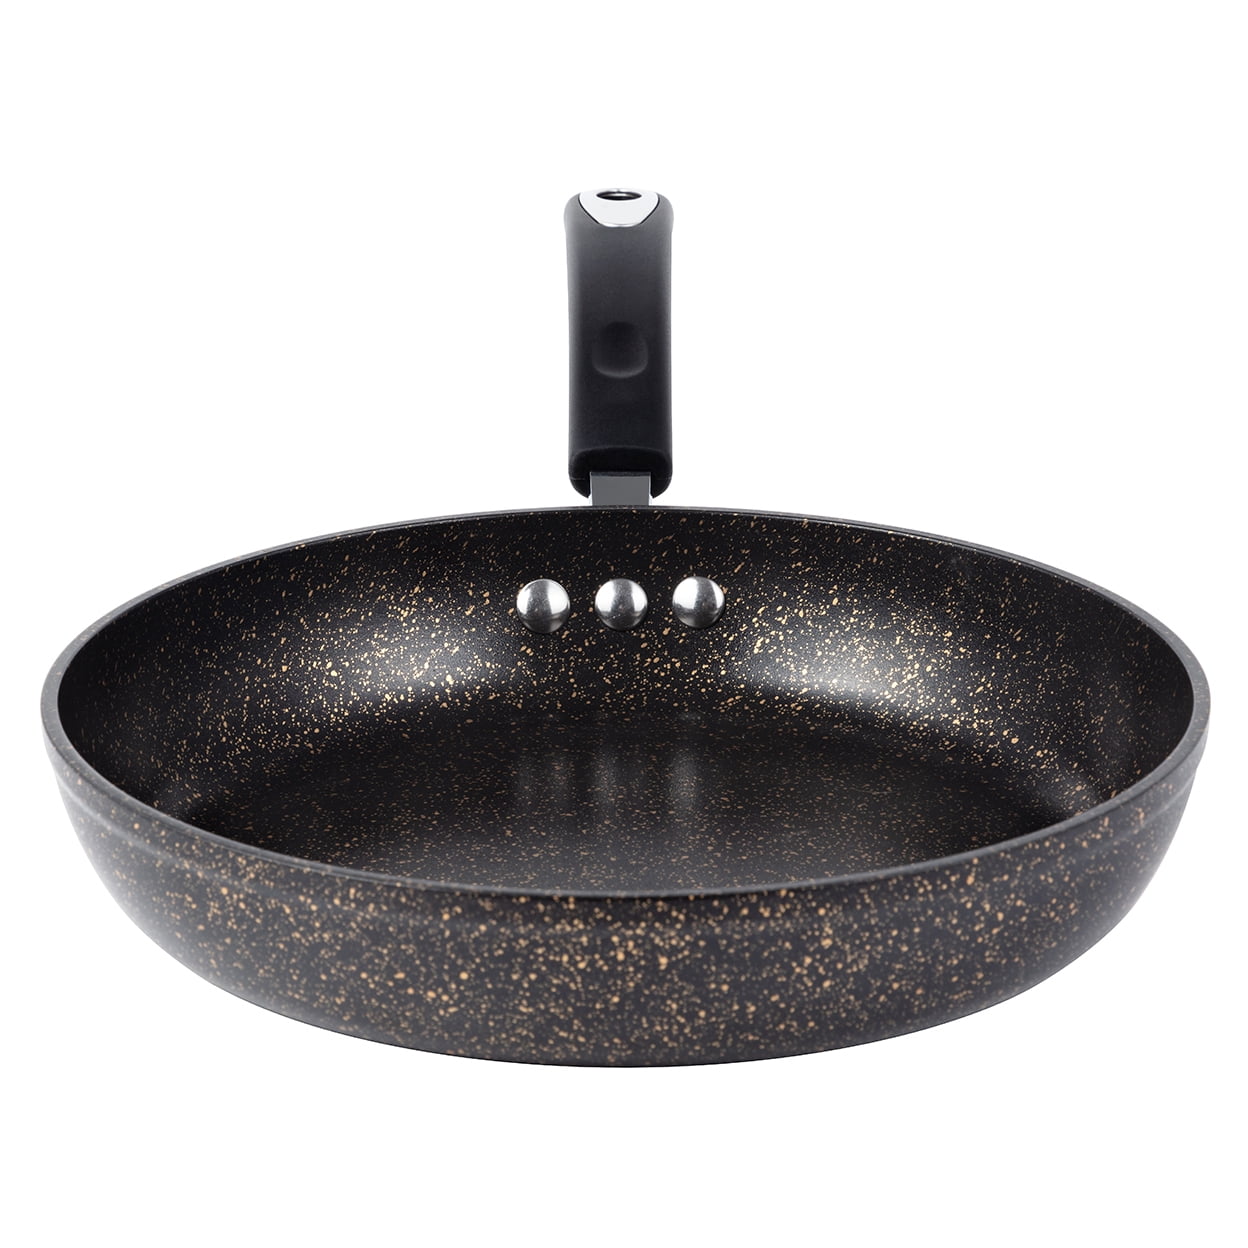 Renewed 10 Stone Earth Frying Pan by Ozeri with 100% APEO & PFOA-Free Stone-Derived Non-Stick Coating from Germany 